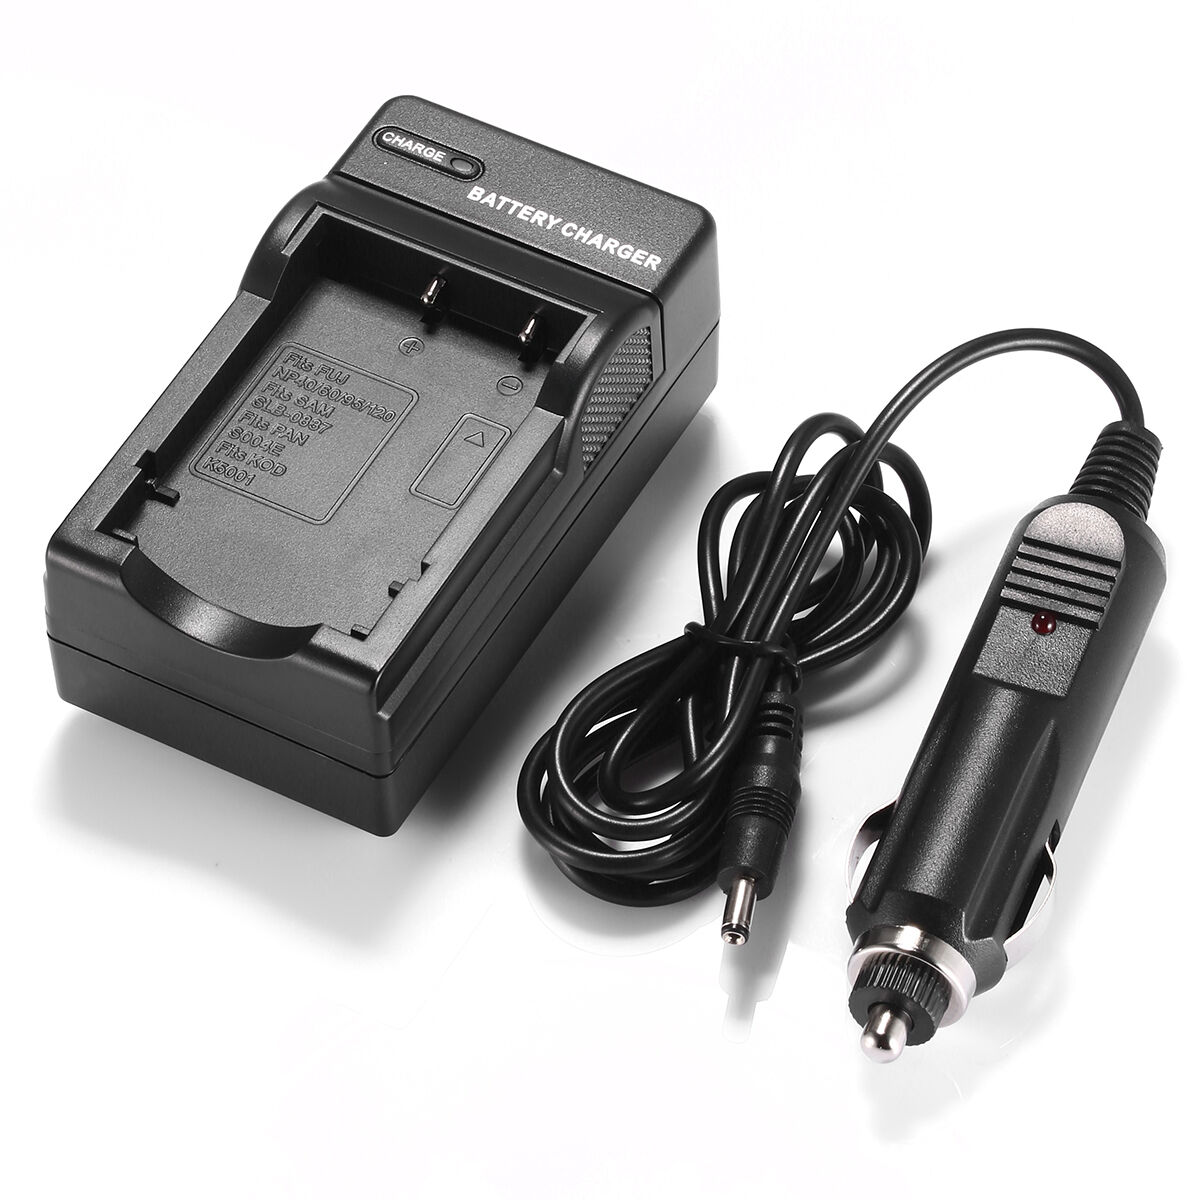 CASIO Exilim Zoom EX-Z90SR battery charger